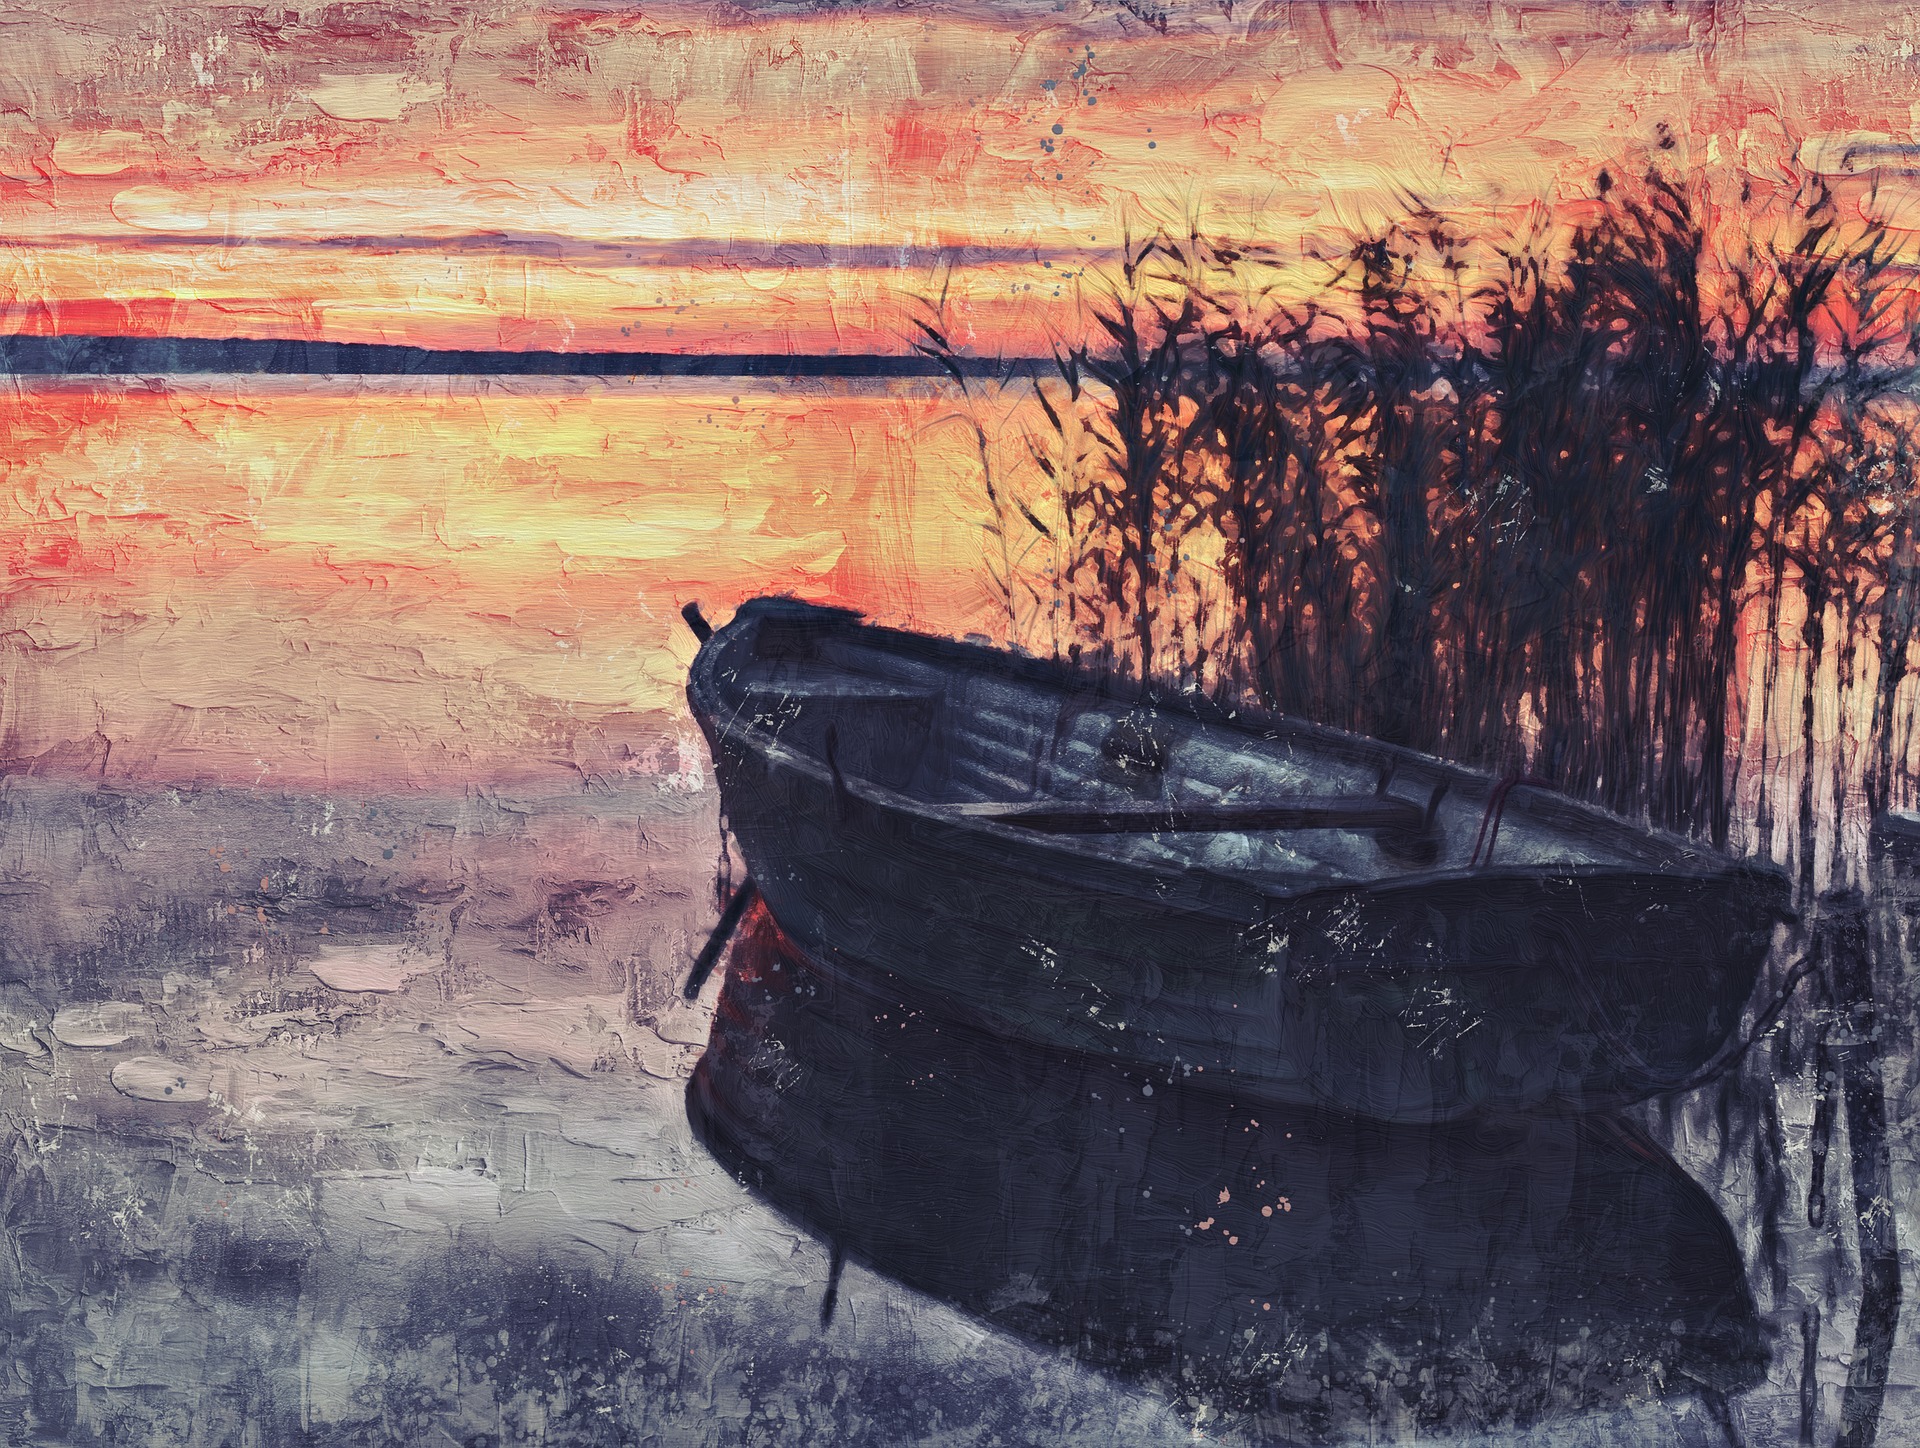 Boat Painting Sunset 1920x1448